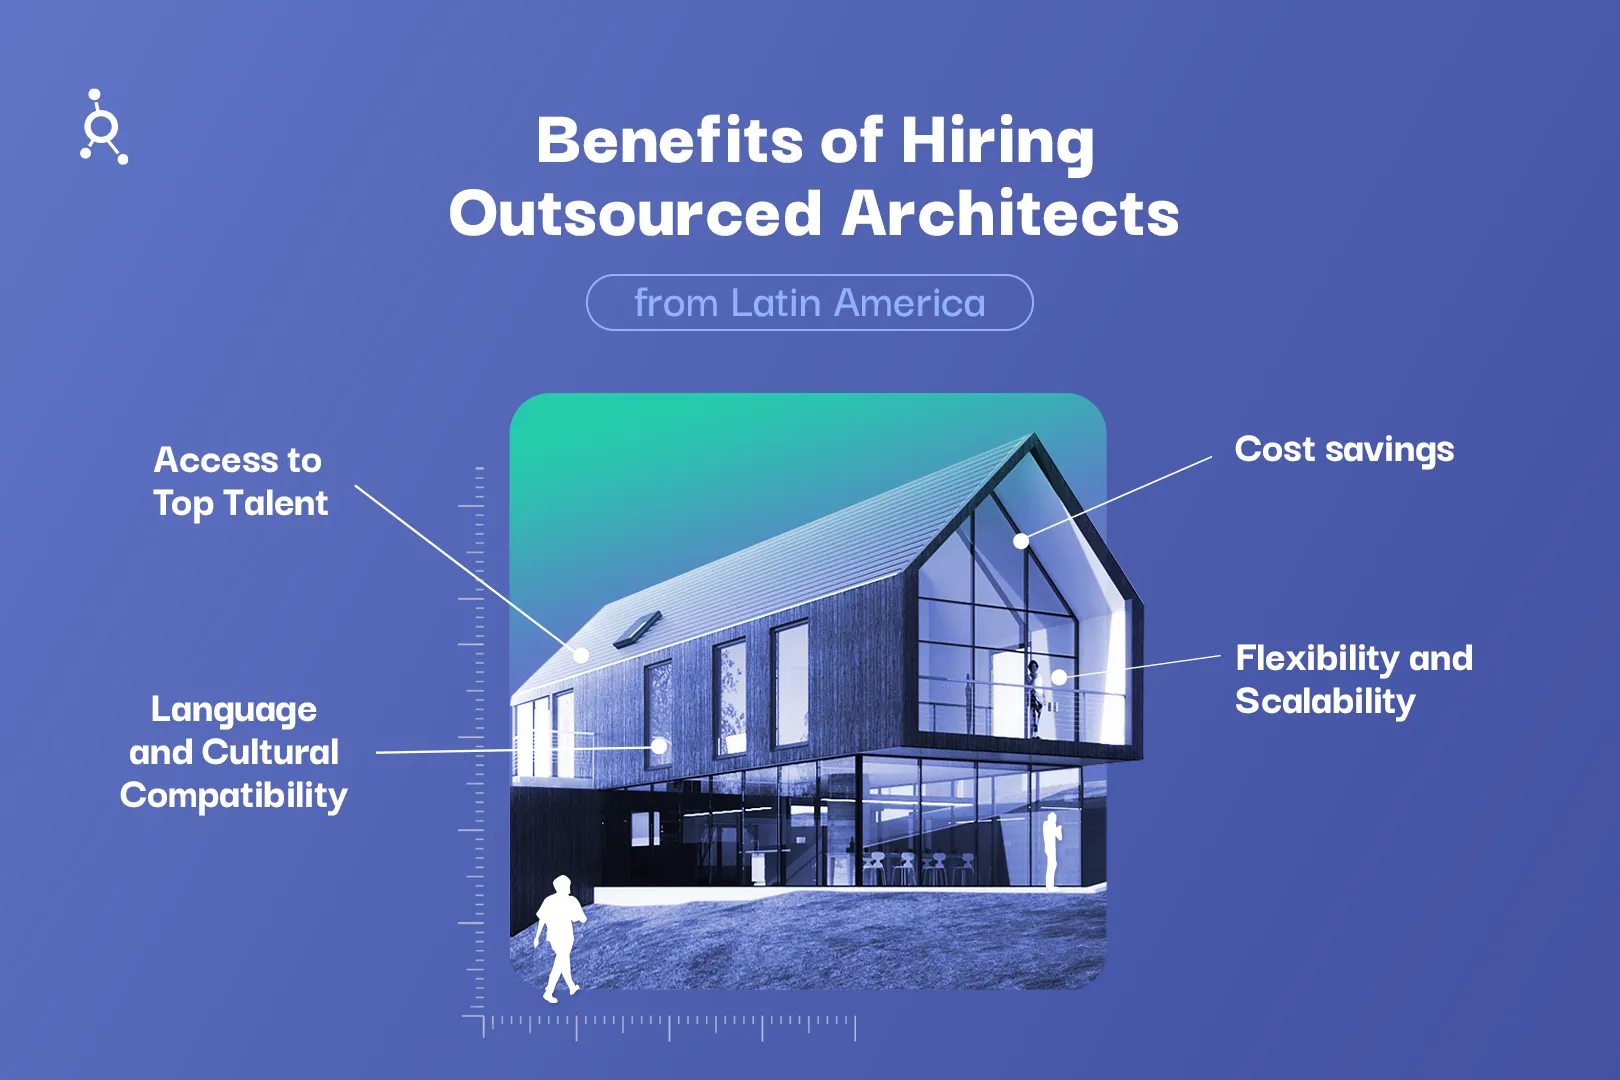 Benefits of Hiring Outsourced Architects